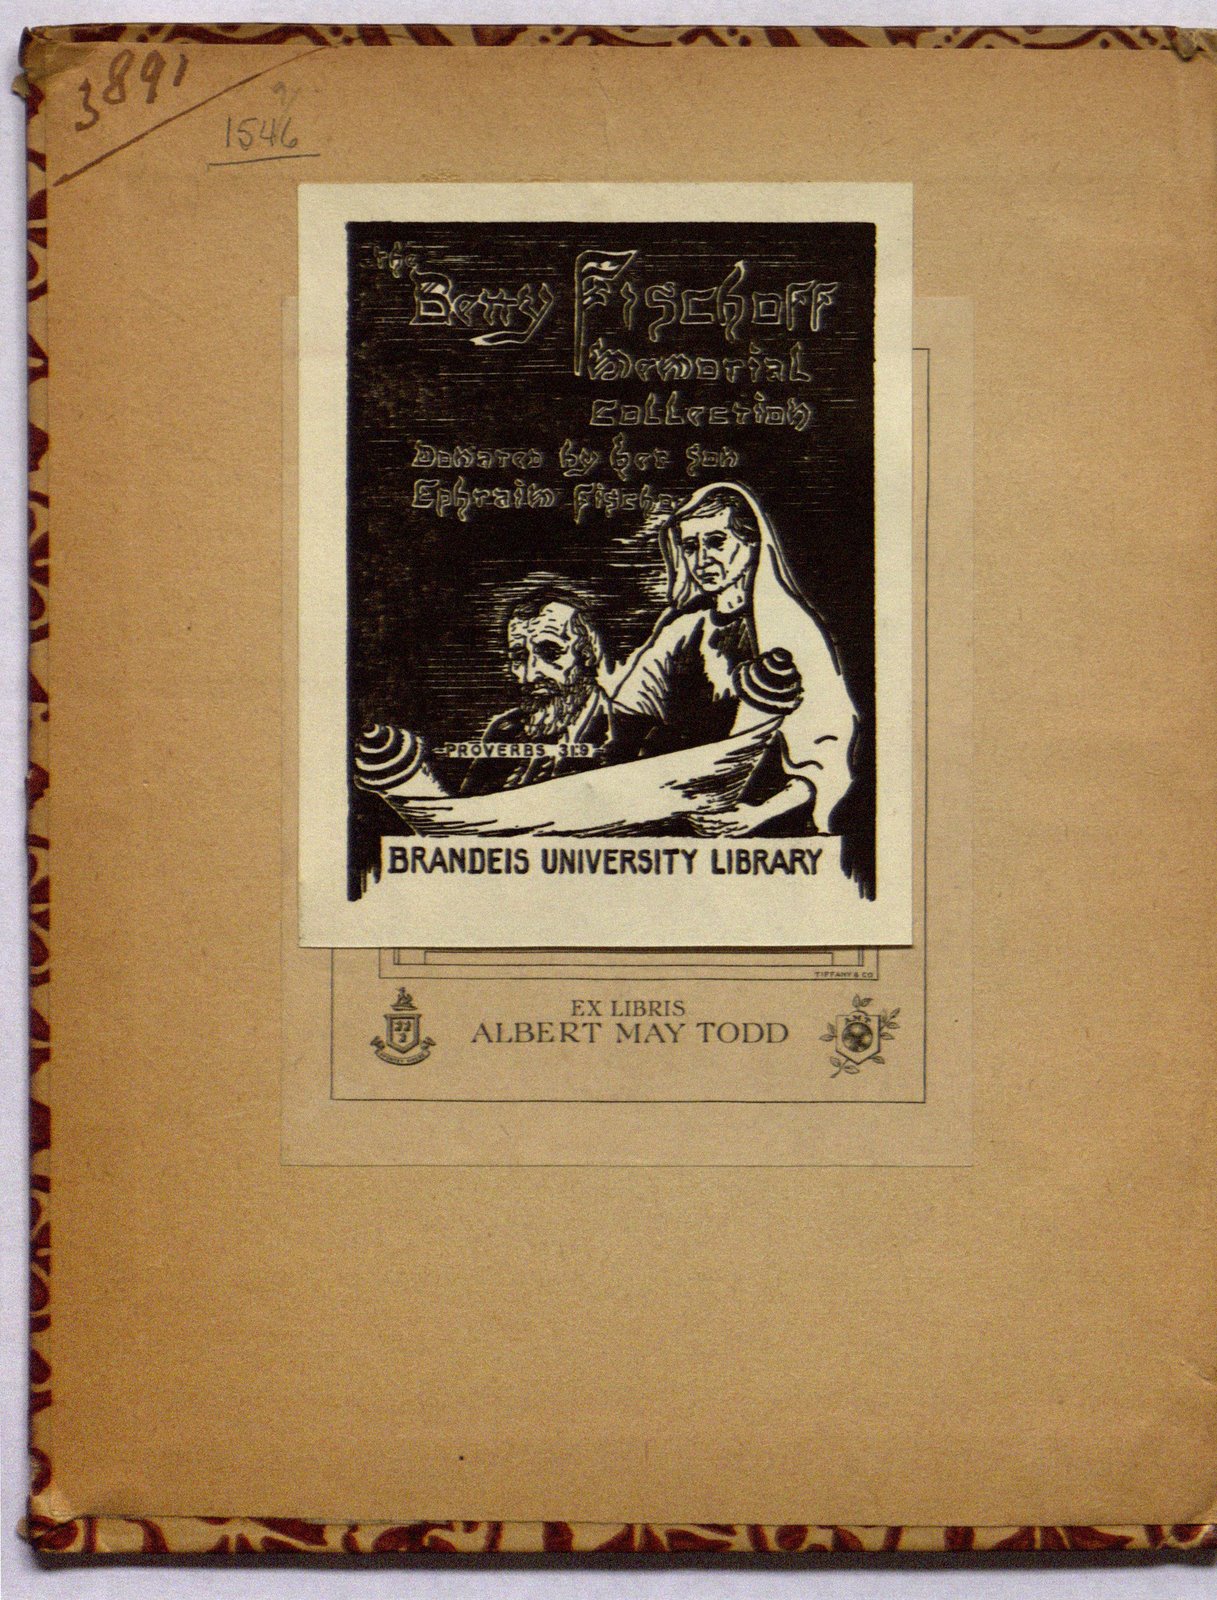 Fischoff bookplate pasted over an earlier bookplate